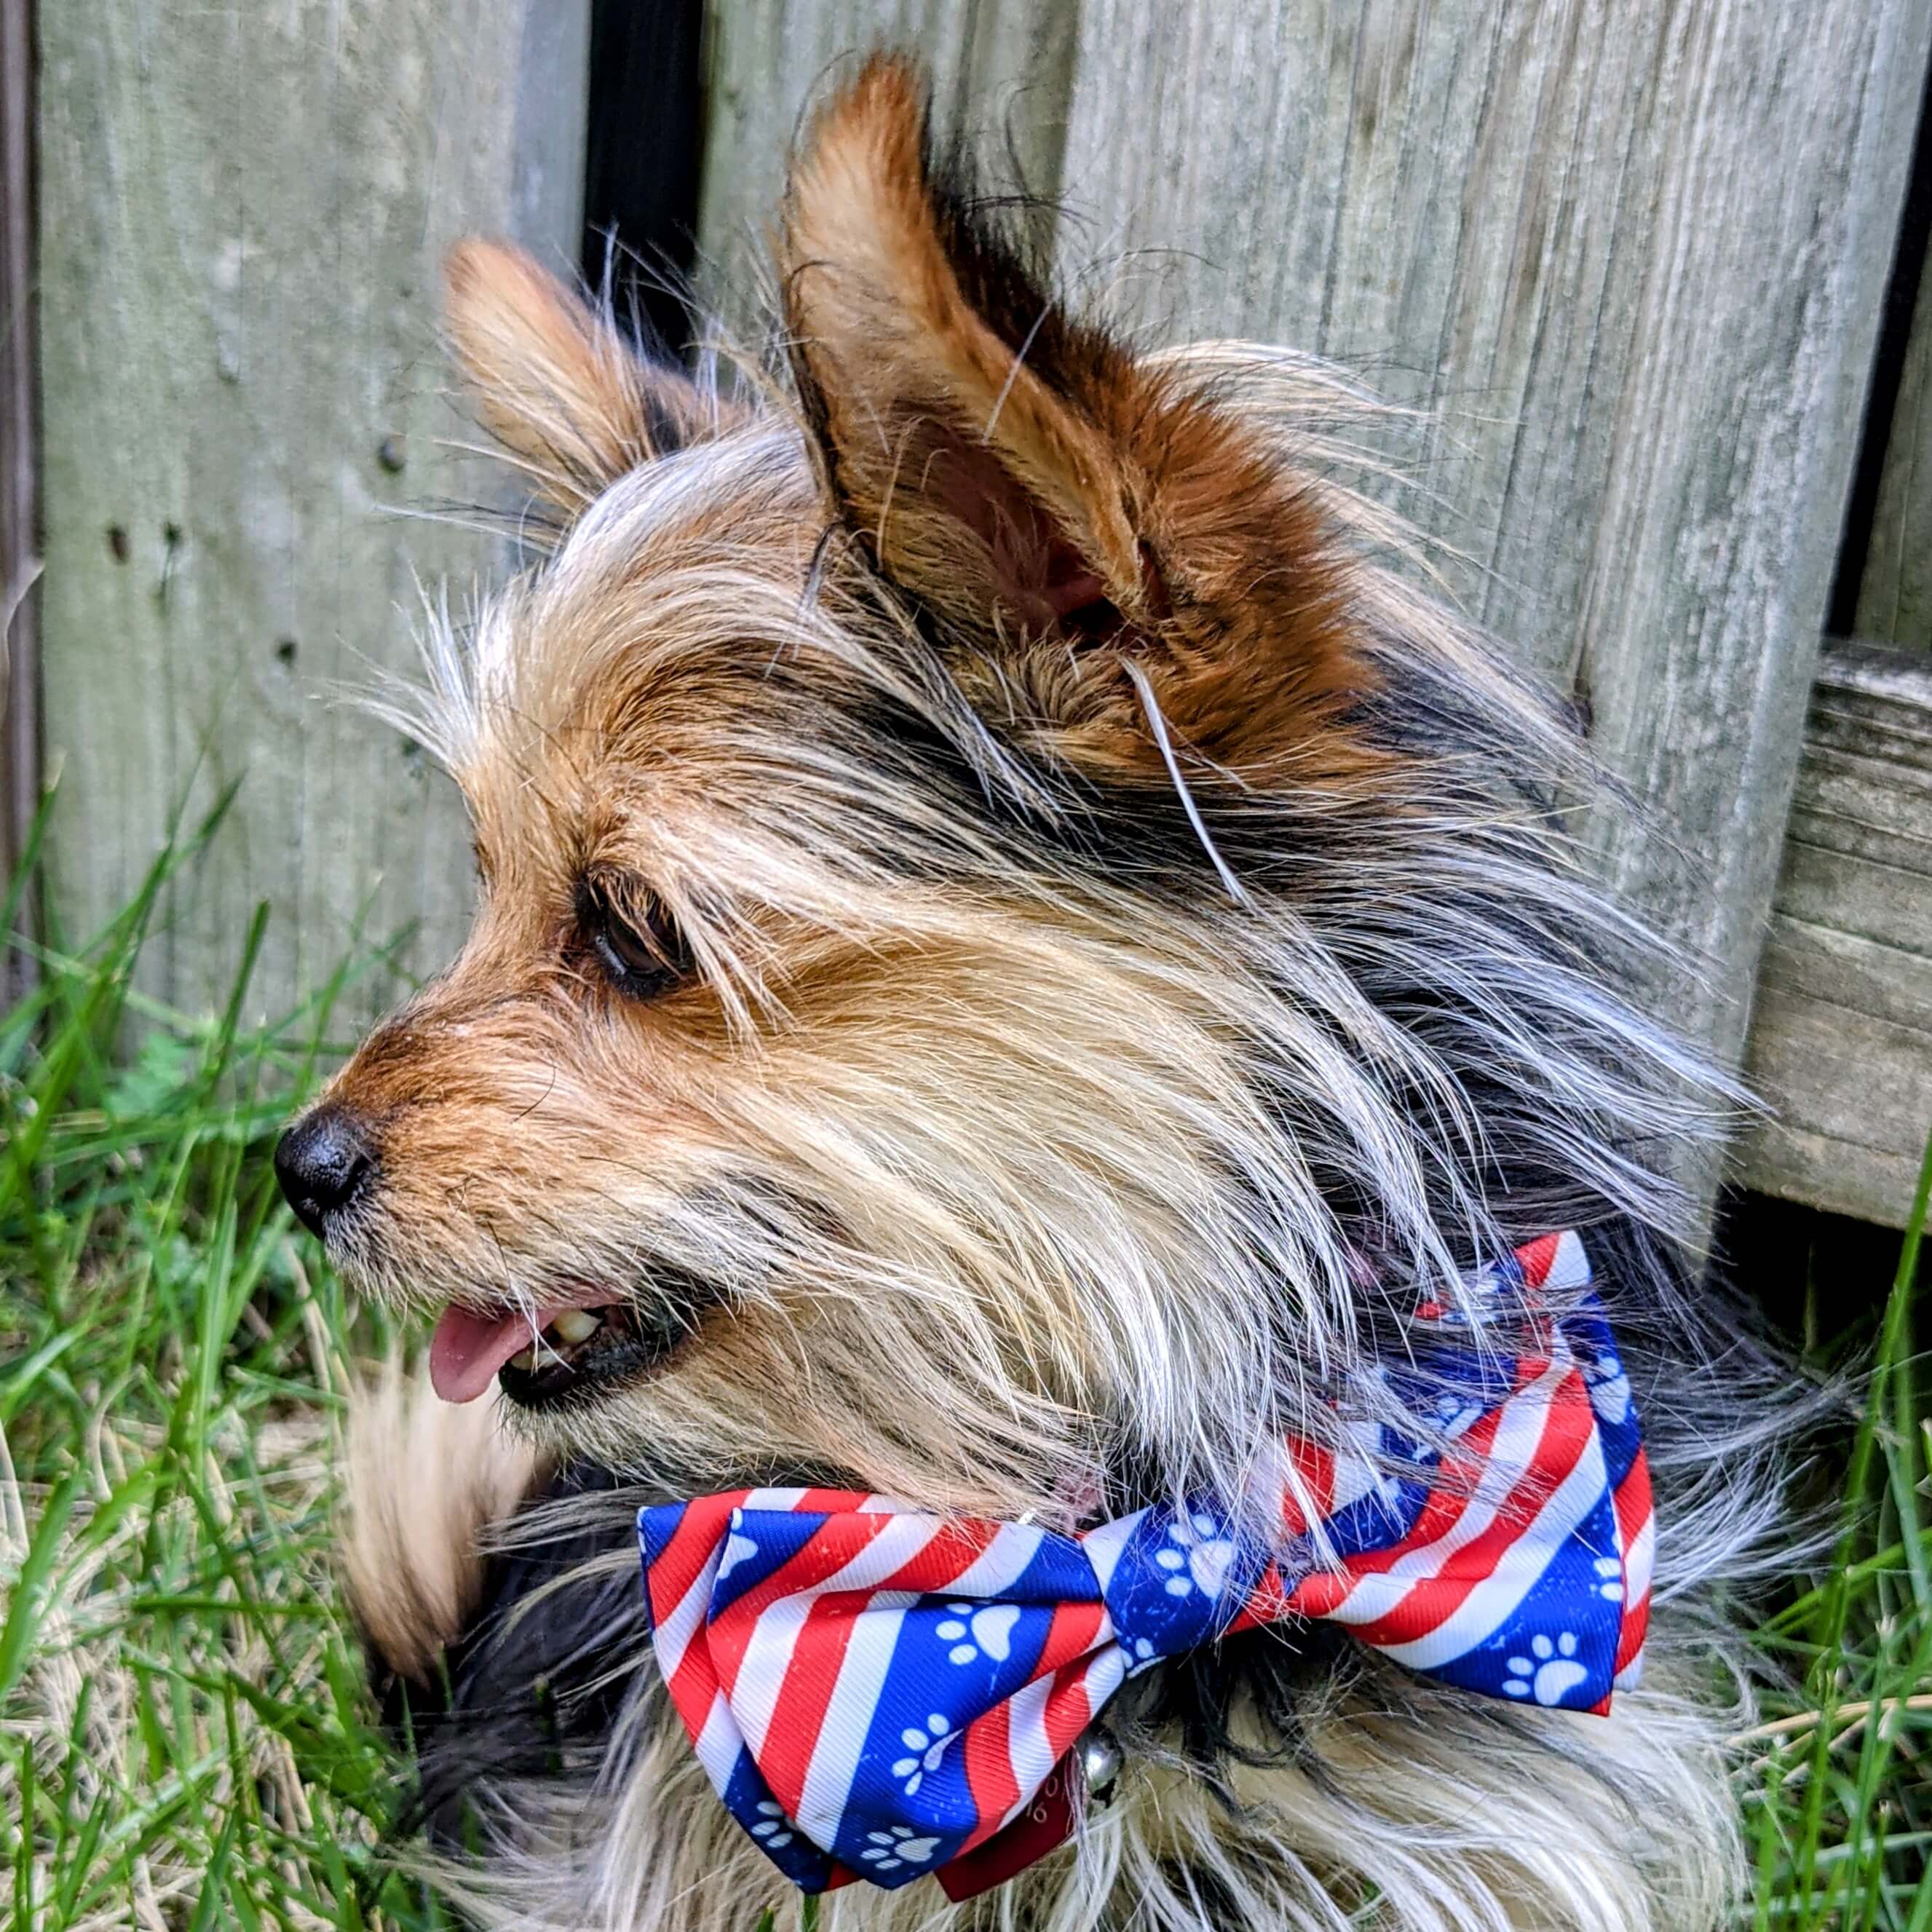 Huxley & Kent paws and stripes bow tie on dog